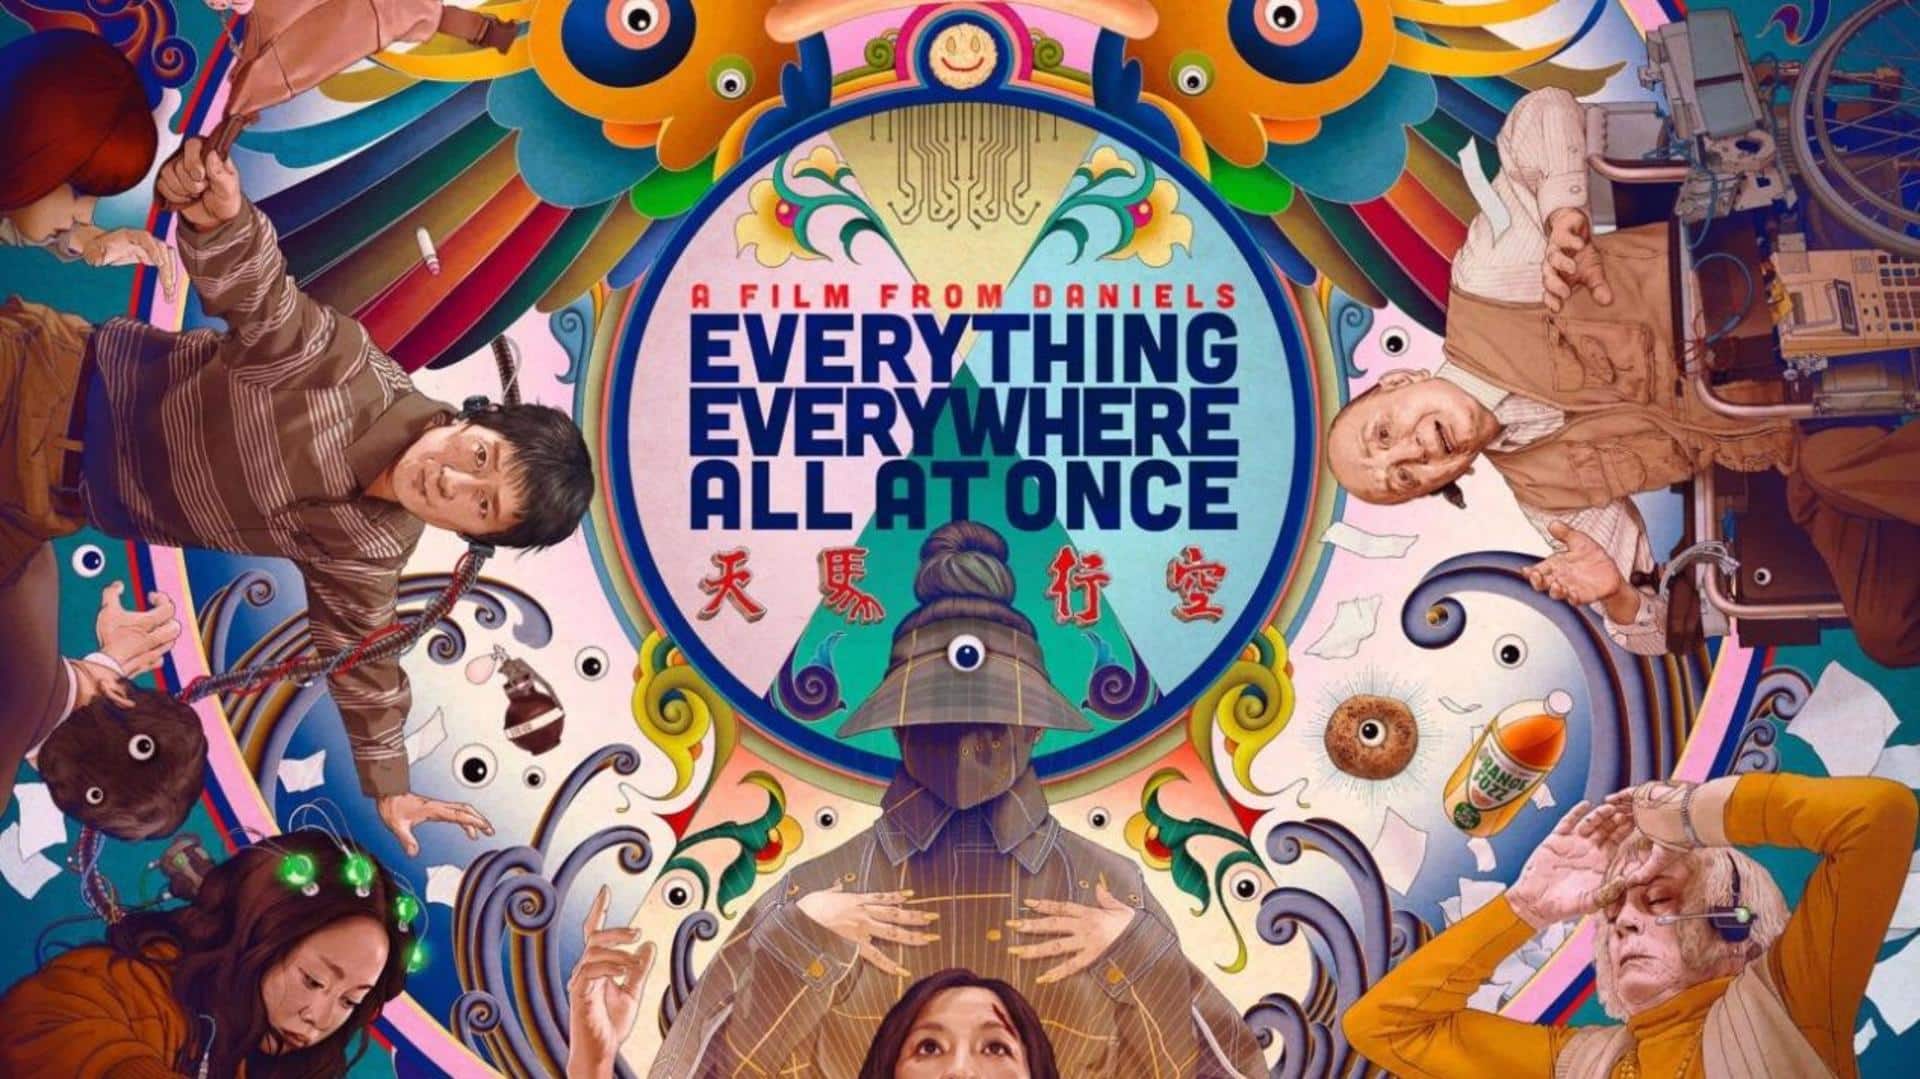 Movie Everything Everywhere All at Once 4k Ultra HD Wallpaper